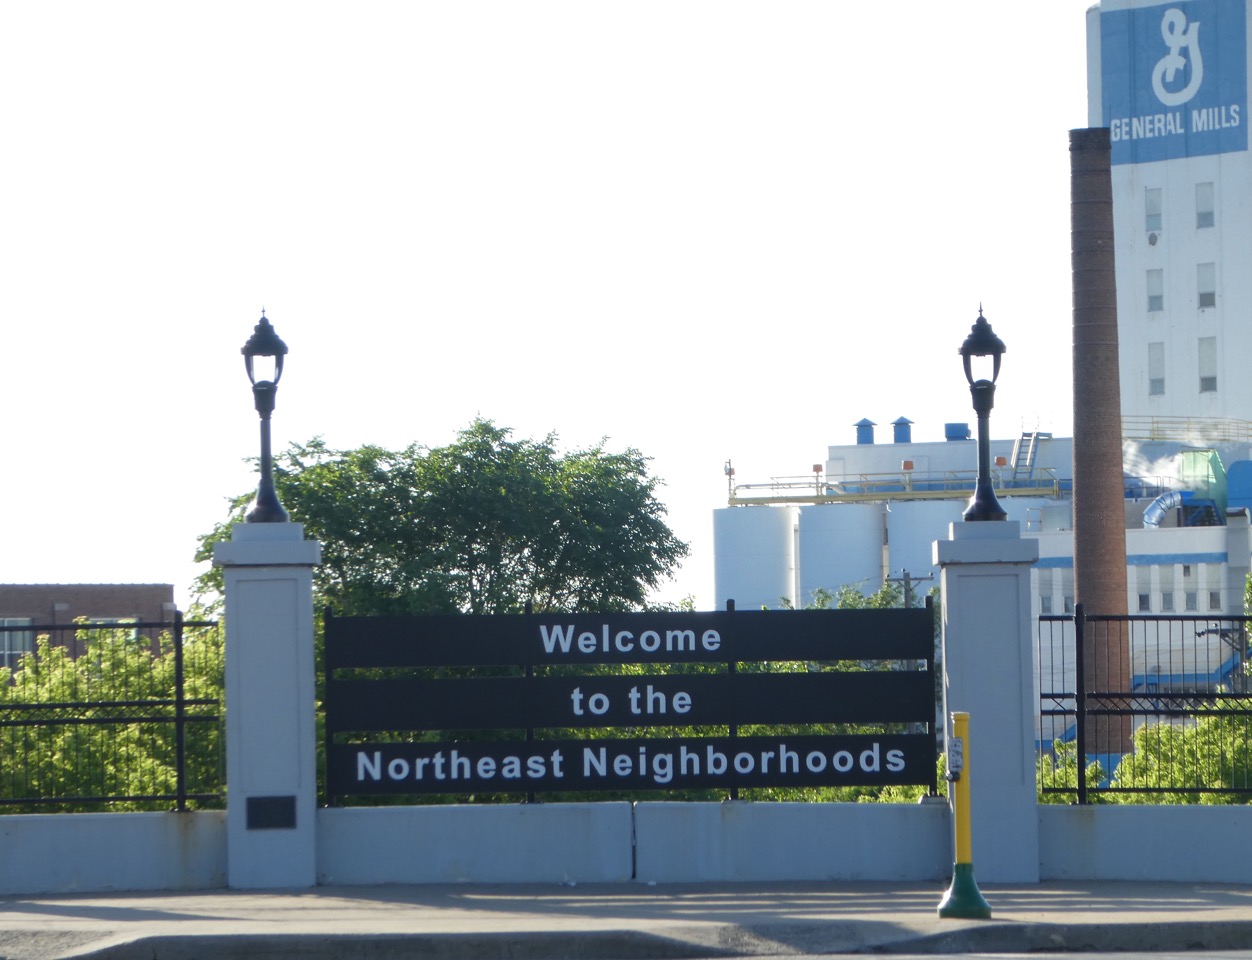 Northeast neighborhoods signage at Central and Broadway